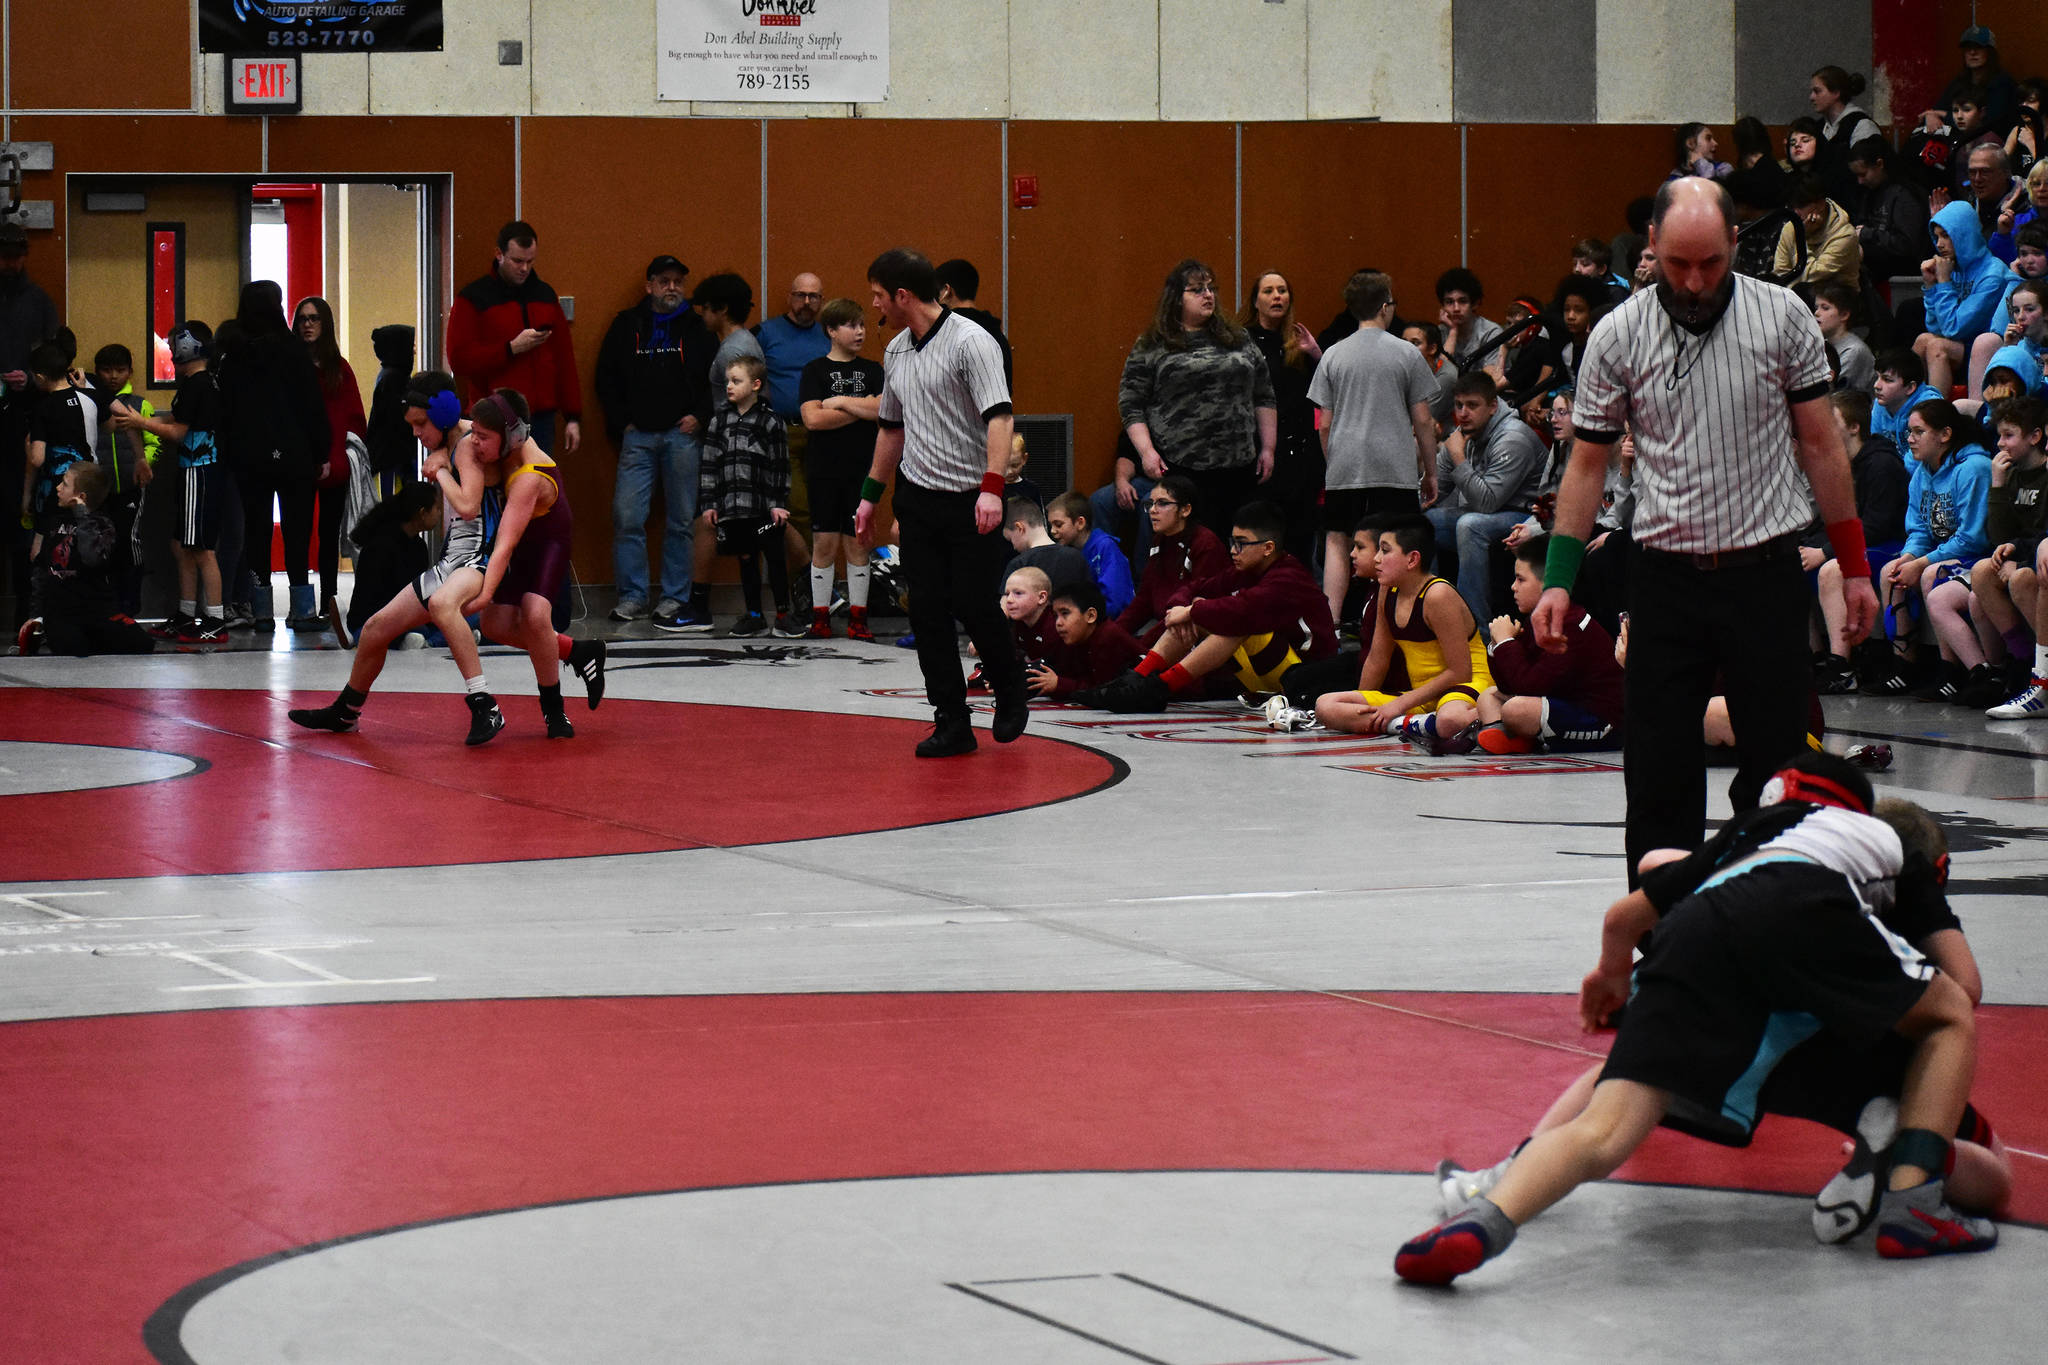 Matches were being held two at a time during the 2020 Southeast Alaska Middle School Wrestling Championship at Floyd Dryden Middle School on Friday. (Peter Segall | Juneau Empire)